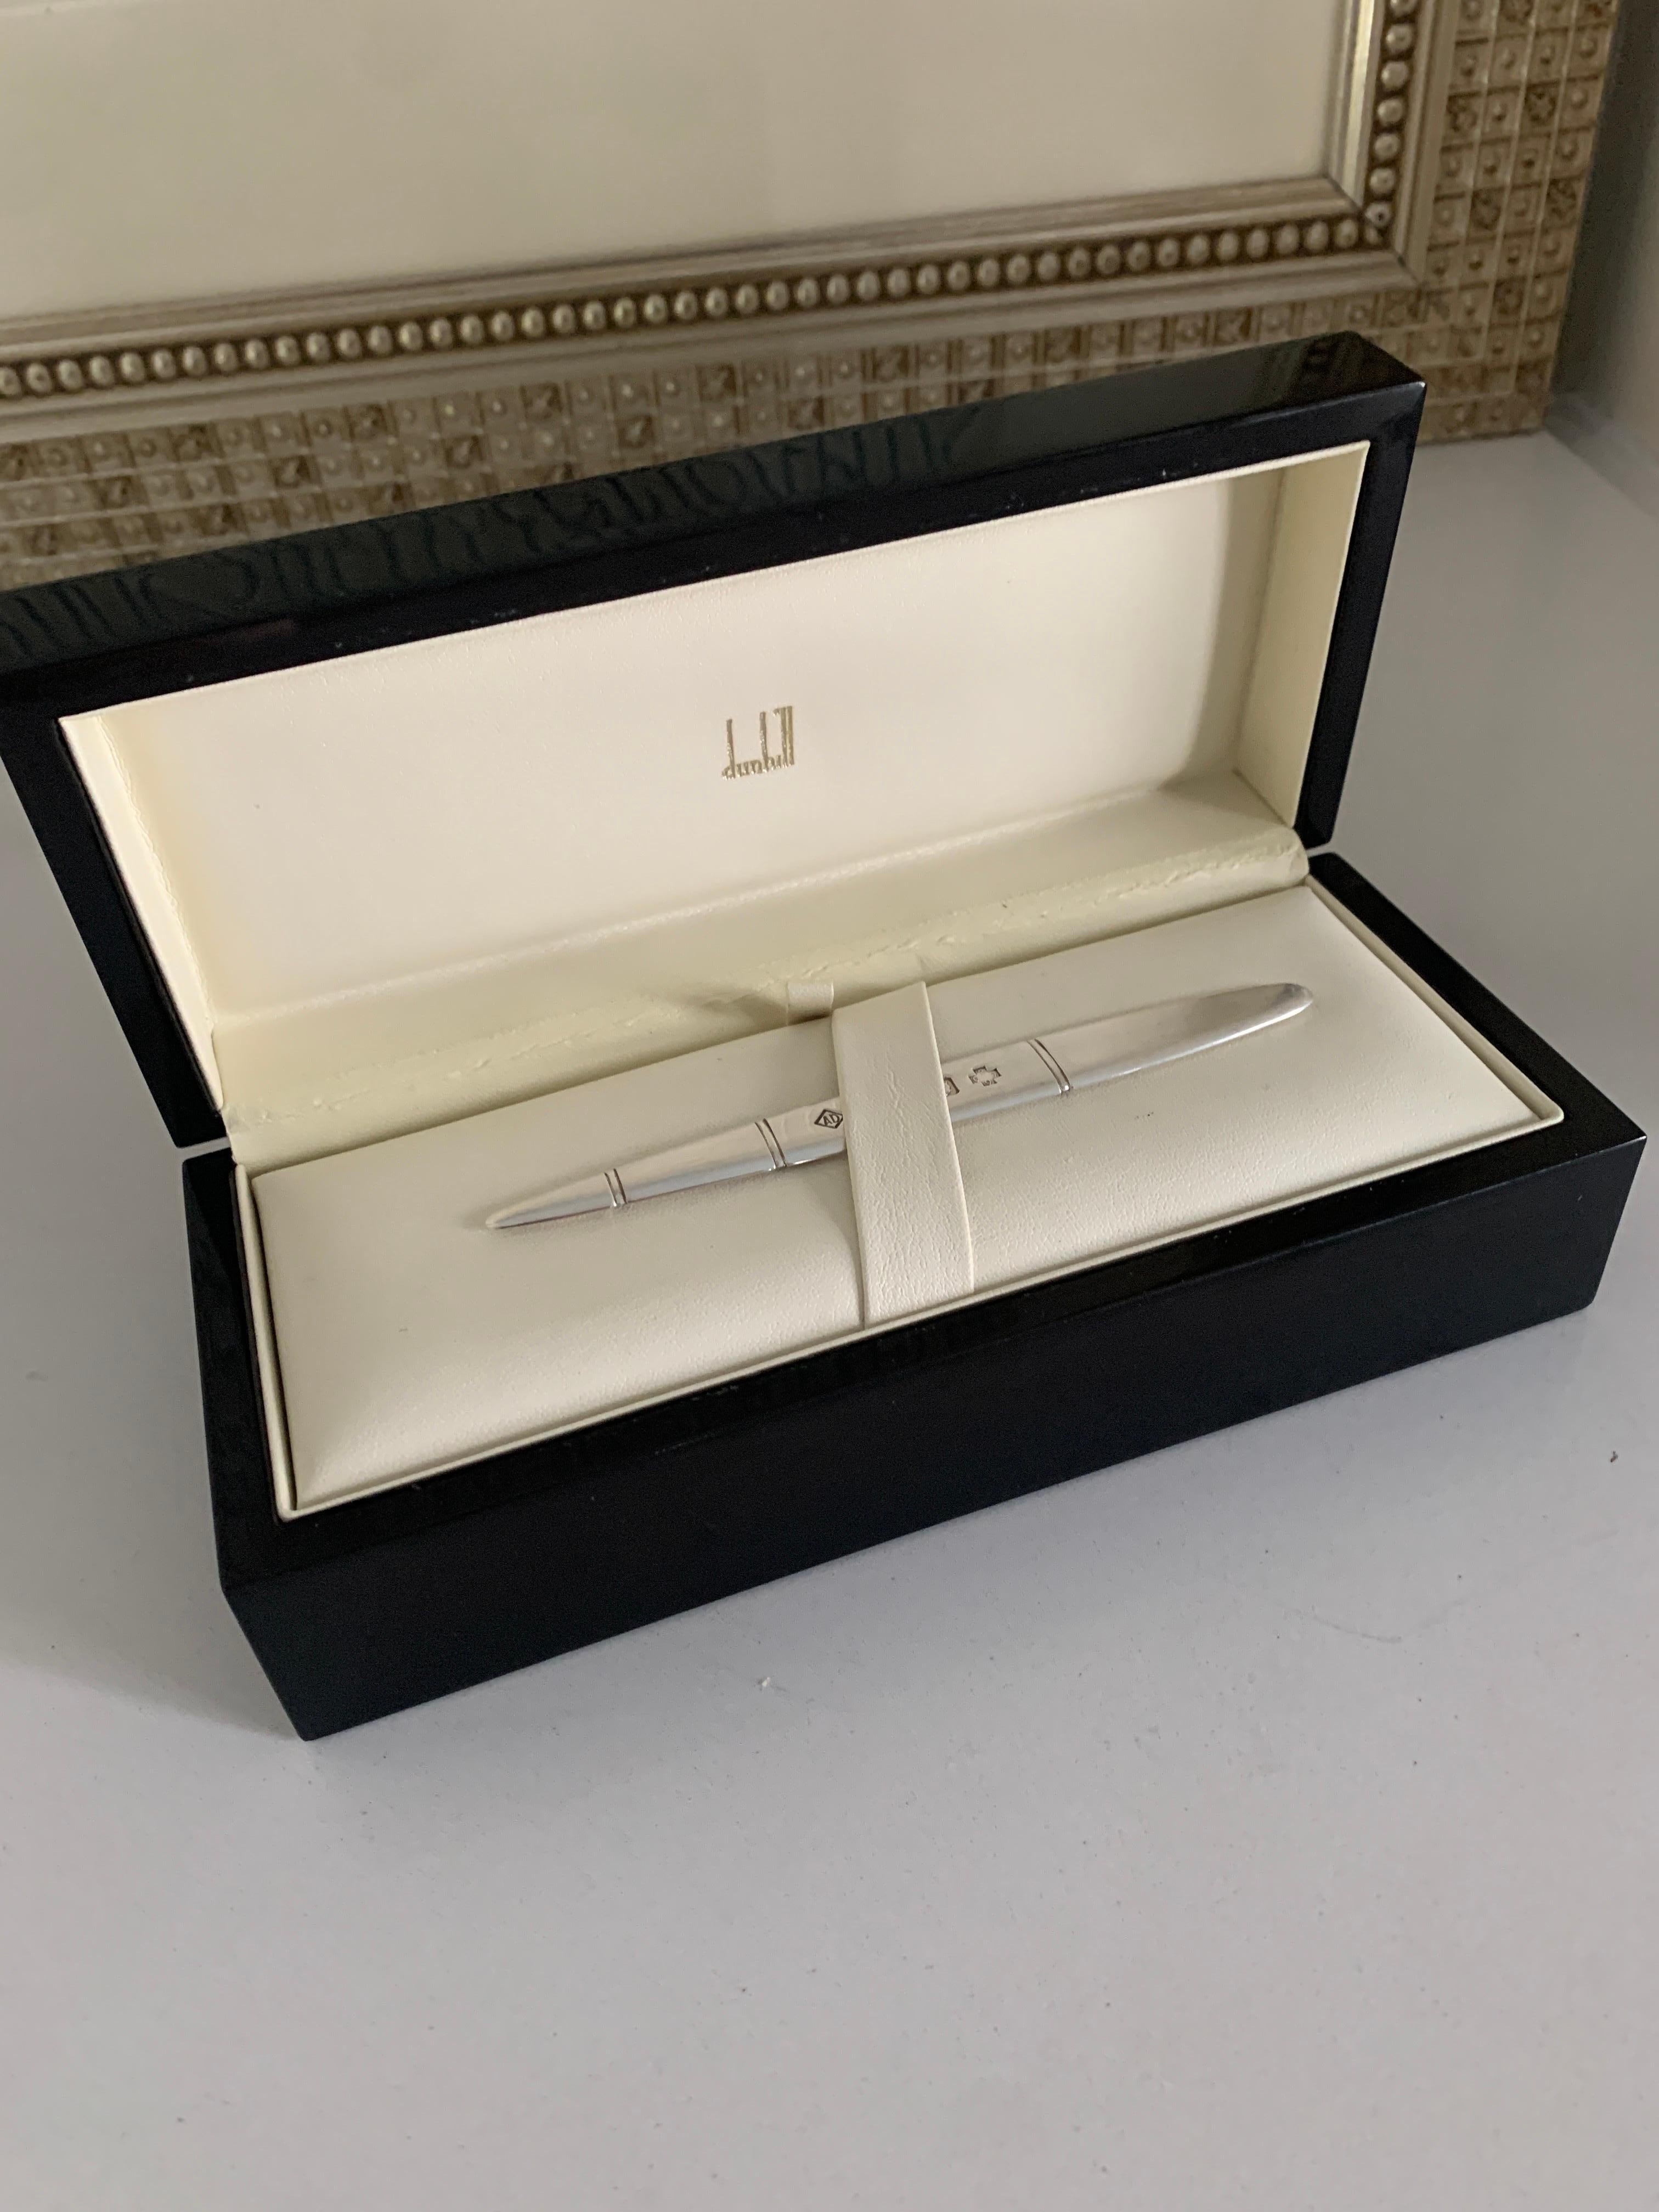 A wonderful and simply elegant Dunhill Letter opener of Sterling Silver. The piece has the Dunhill logo in small and very sophisticated lettering and placement. The box is clean and a wonderful presentation piece. Clearly more came in the box based